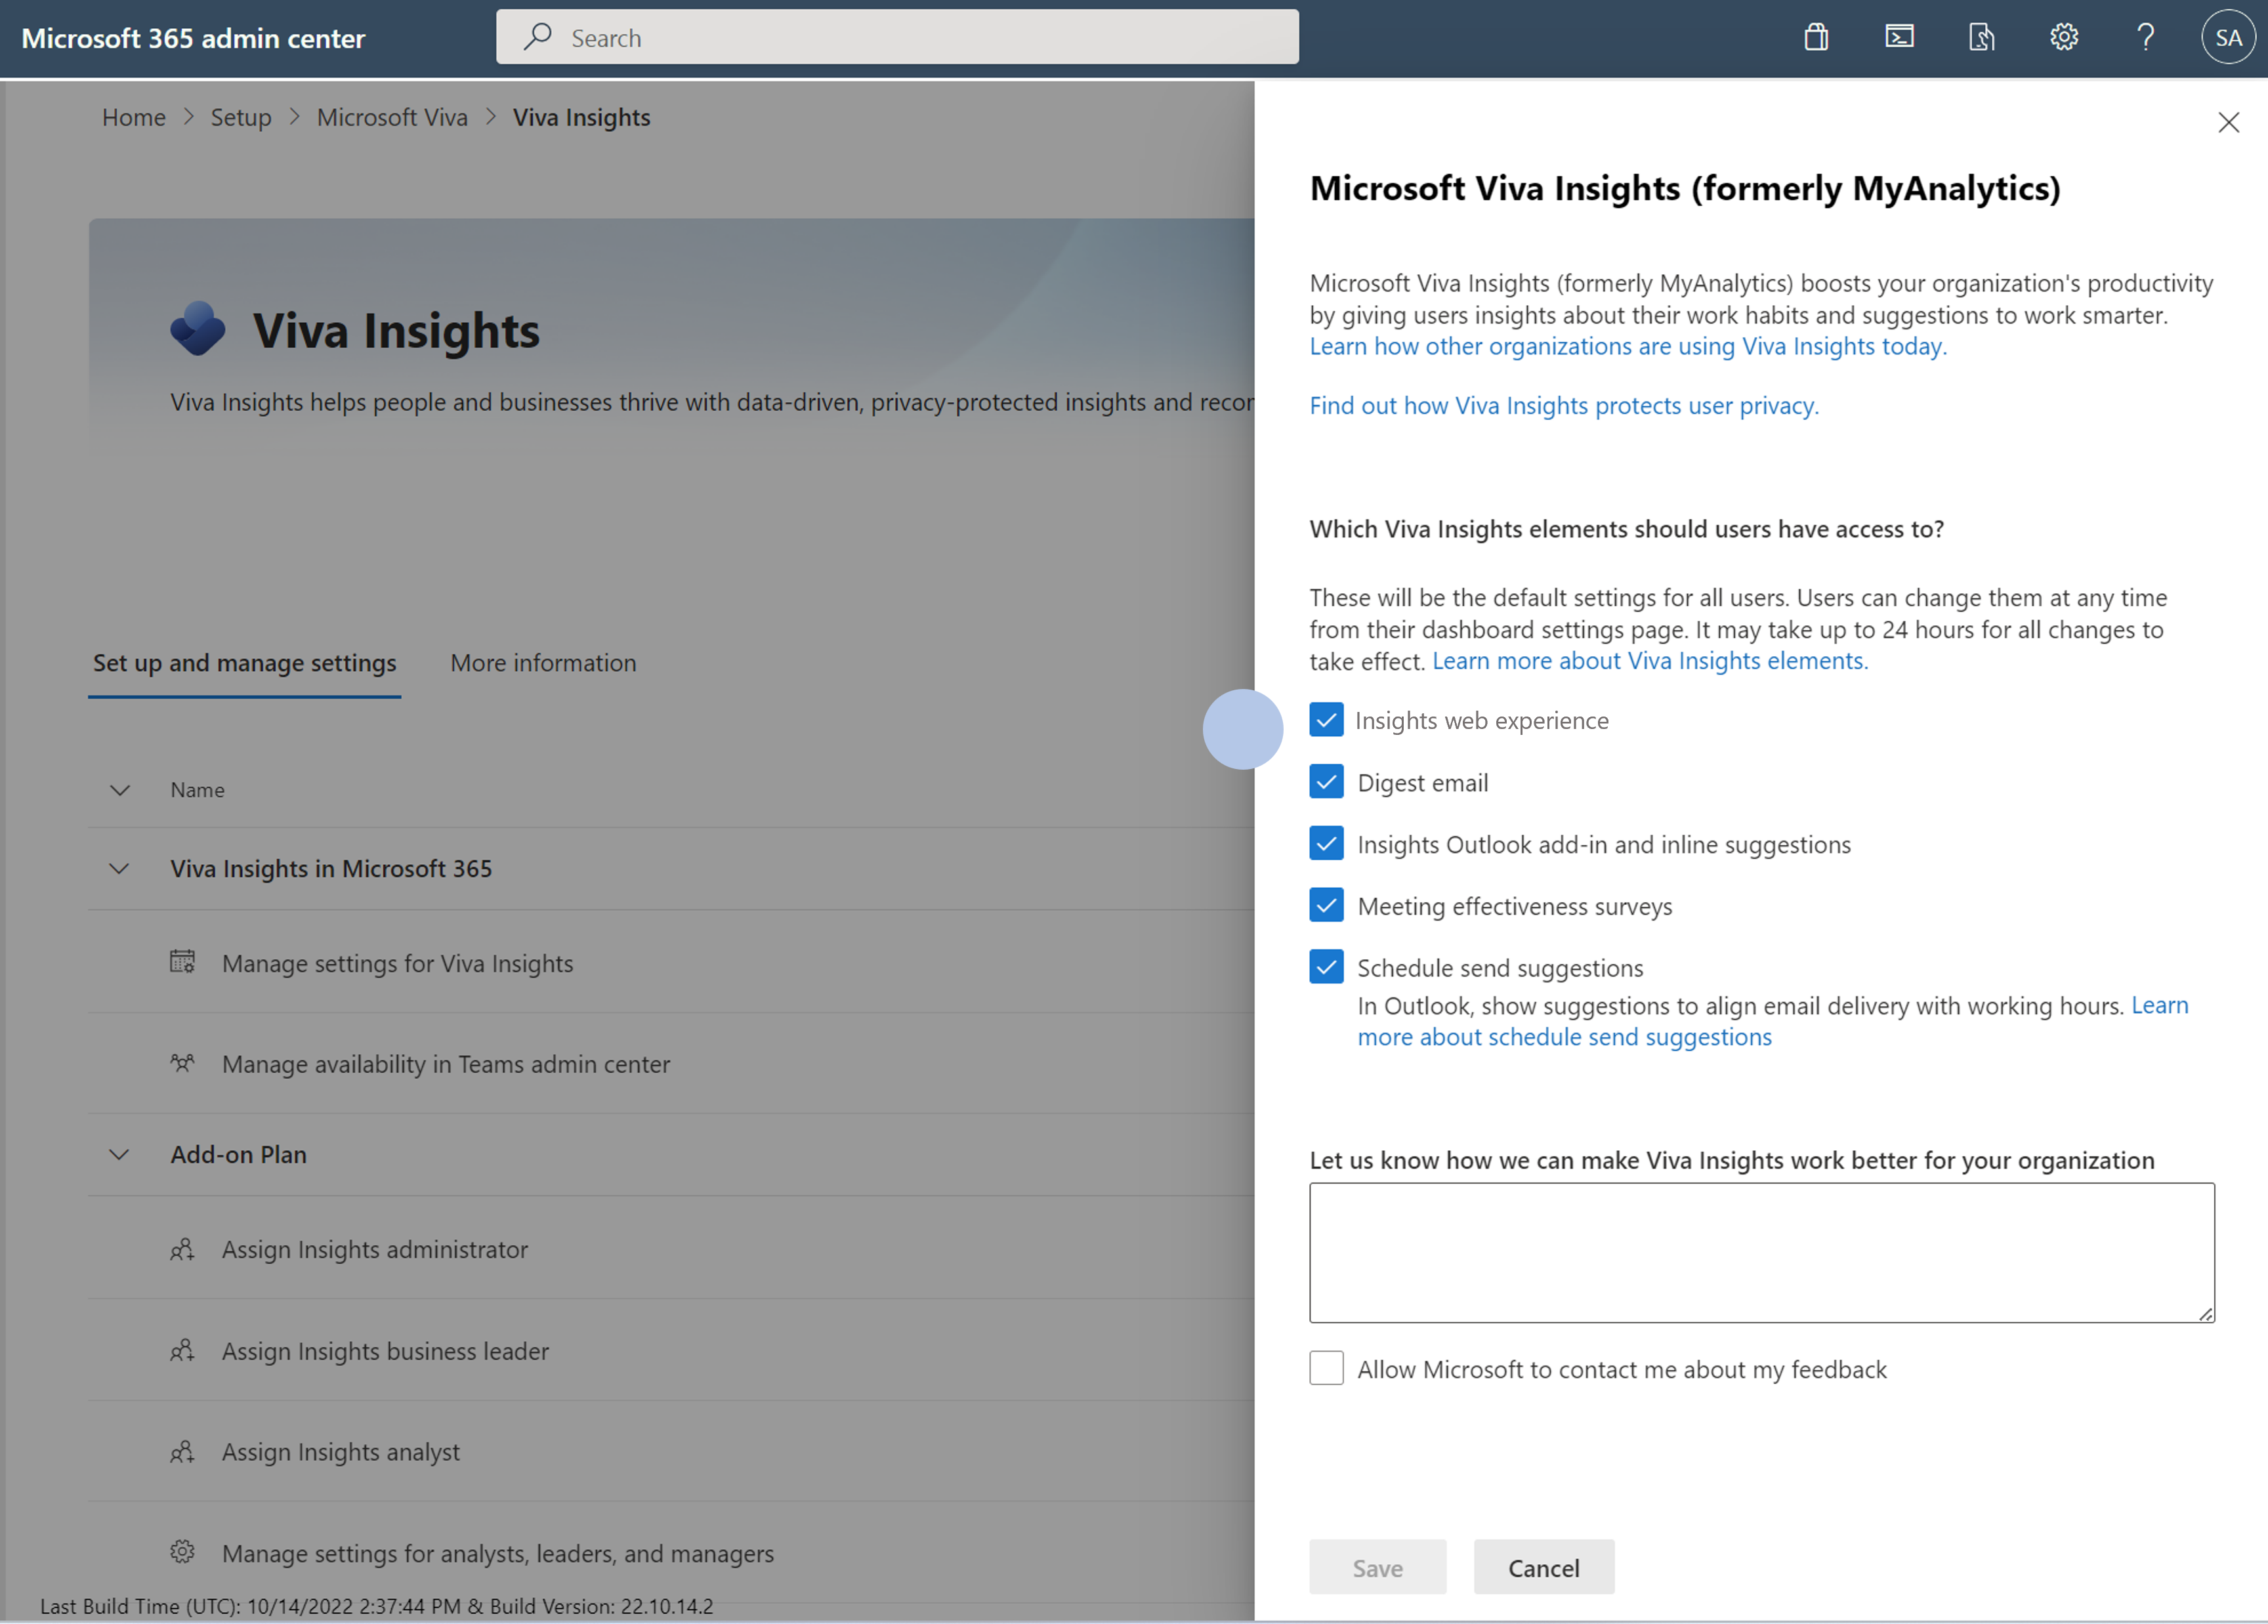 By default, it should show that all Viva Insights elements are enabled.